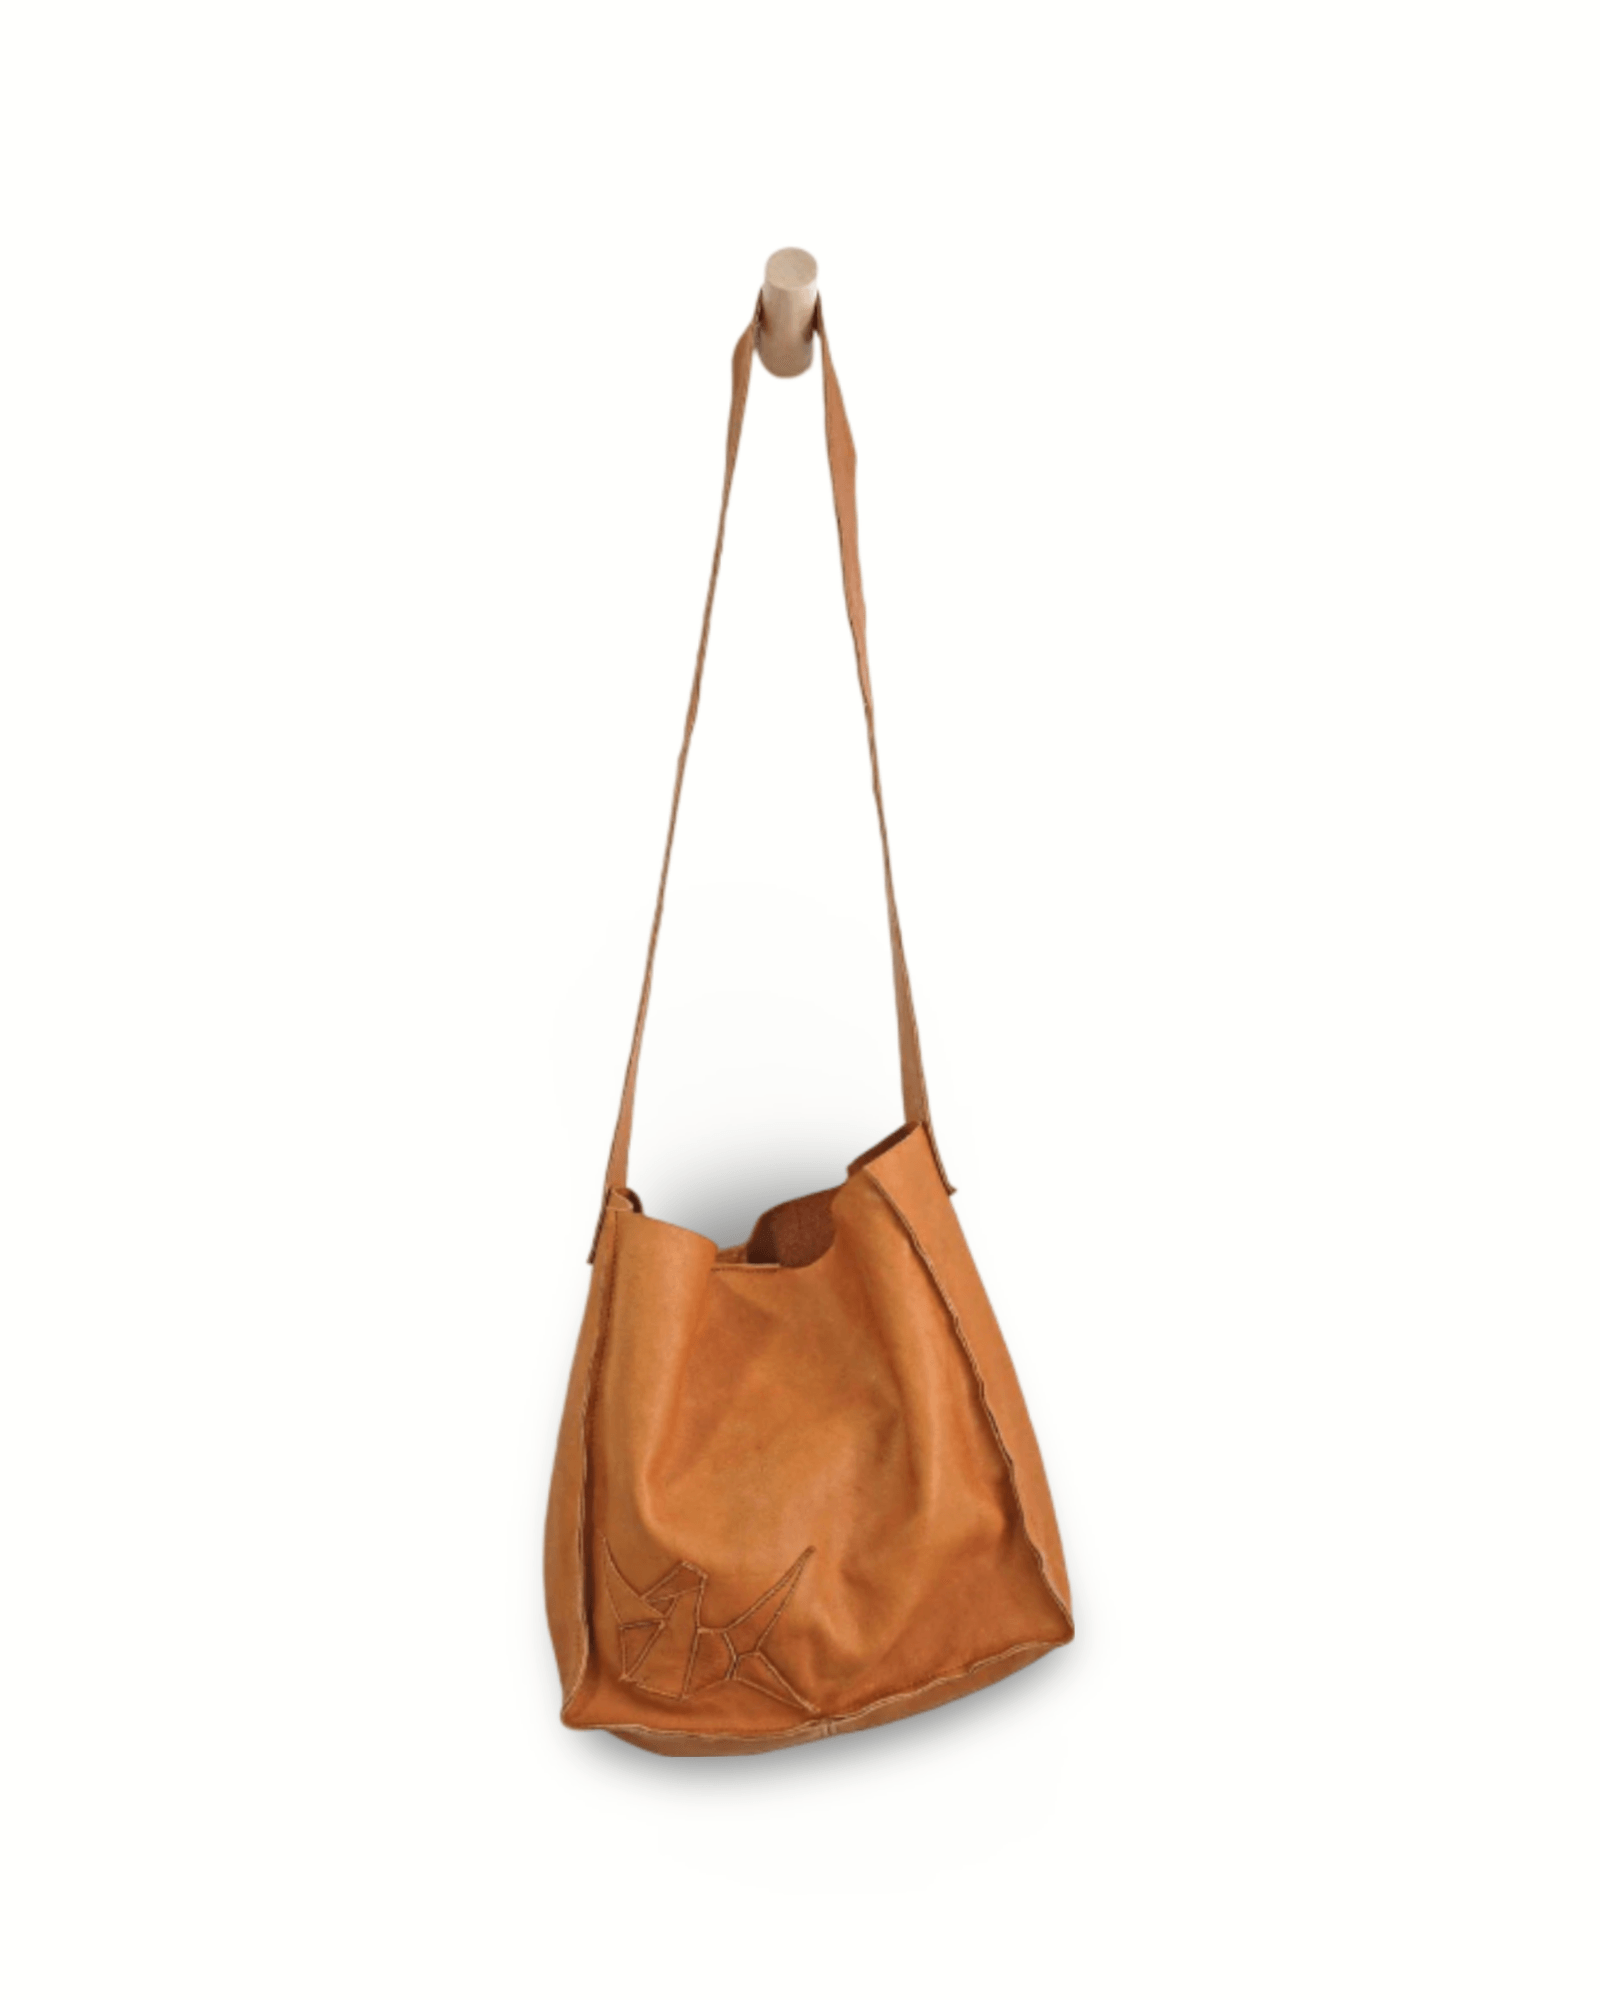 Origami Cranes Patched Leather Hobo - ORIEN VIN TIQUE